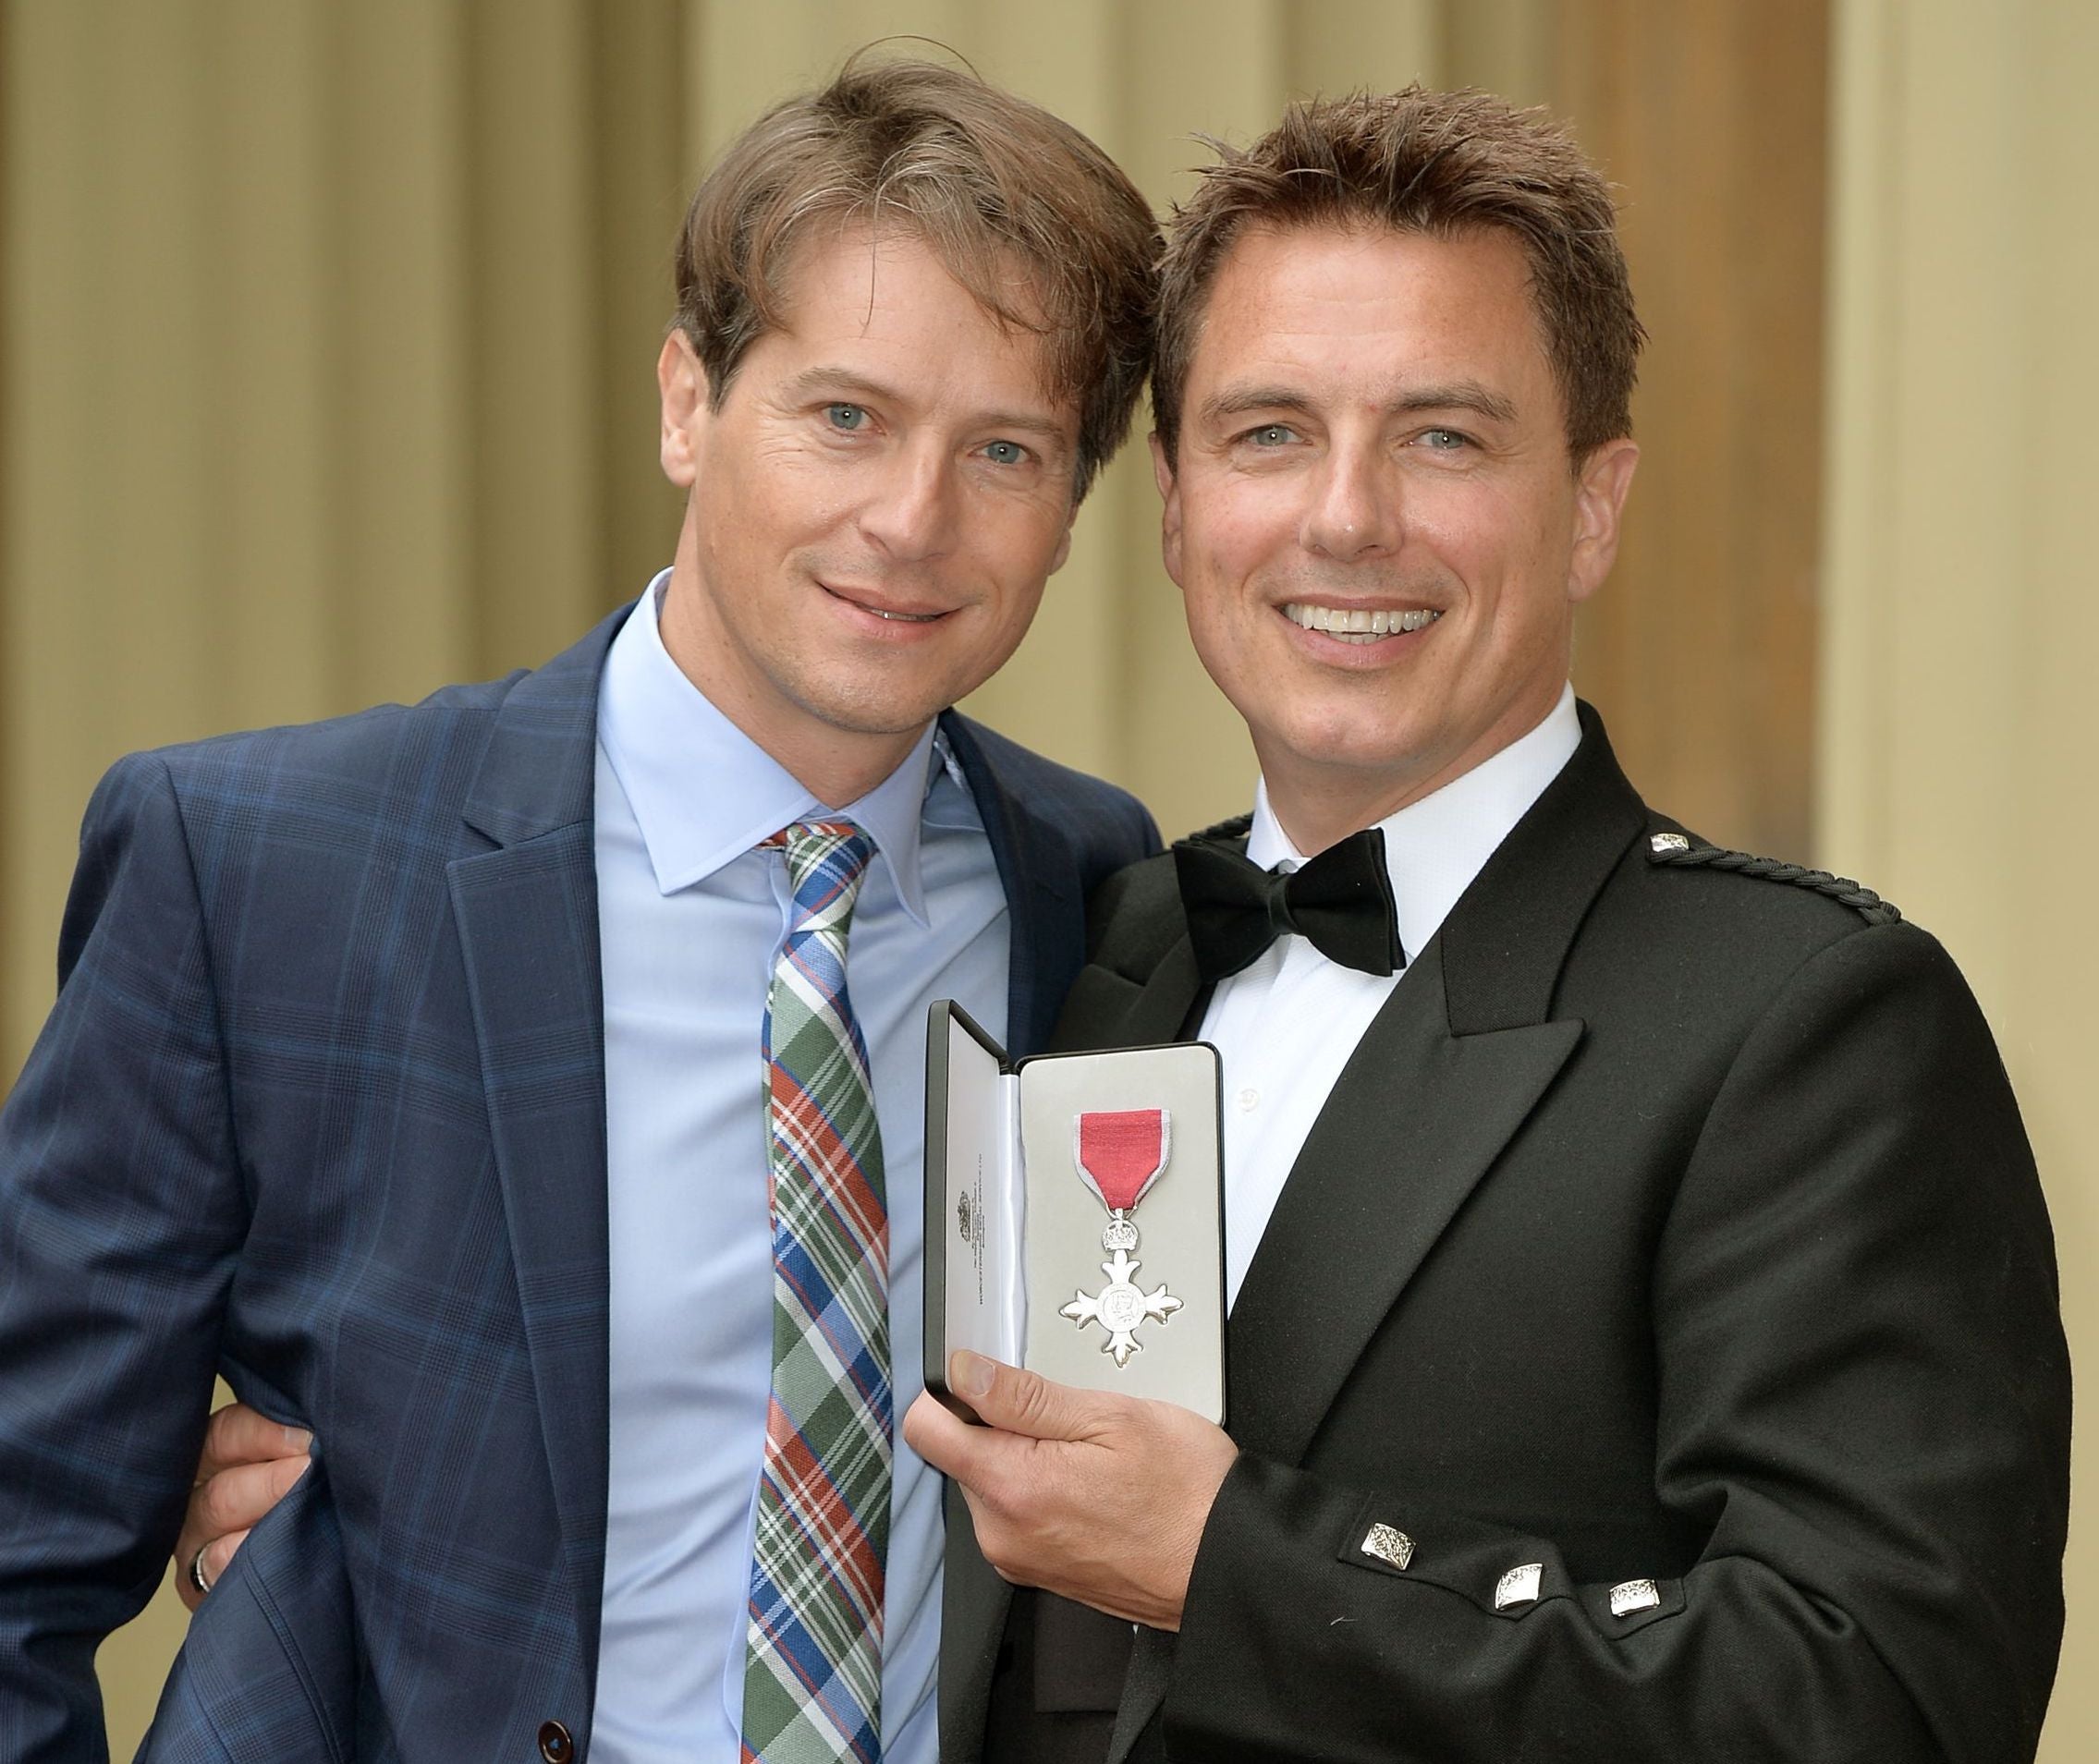 Barrowman with his husband, Scott Gill, after being awarded an MBE at Buckingham Palace, October 2014